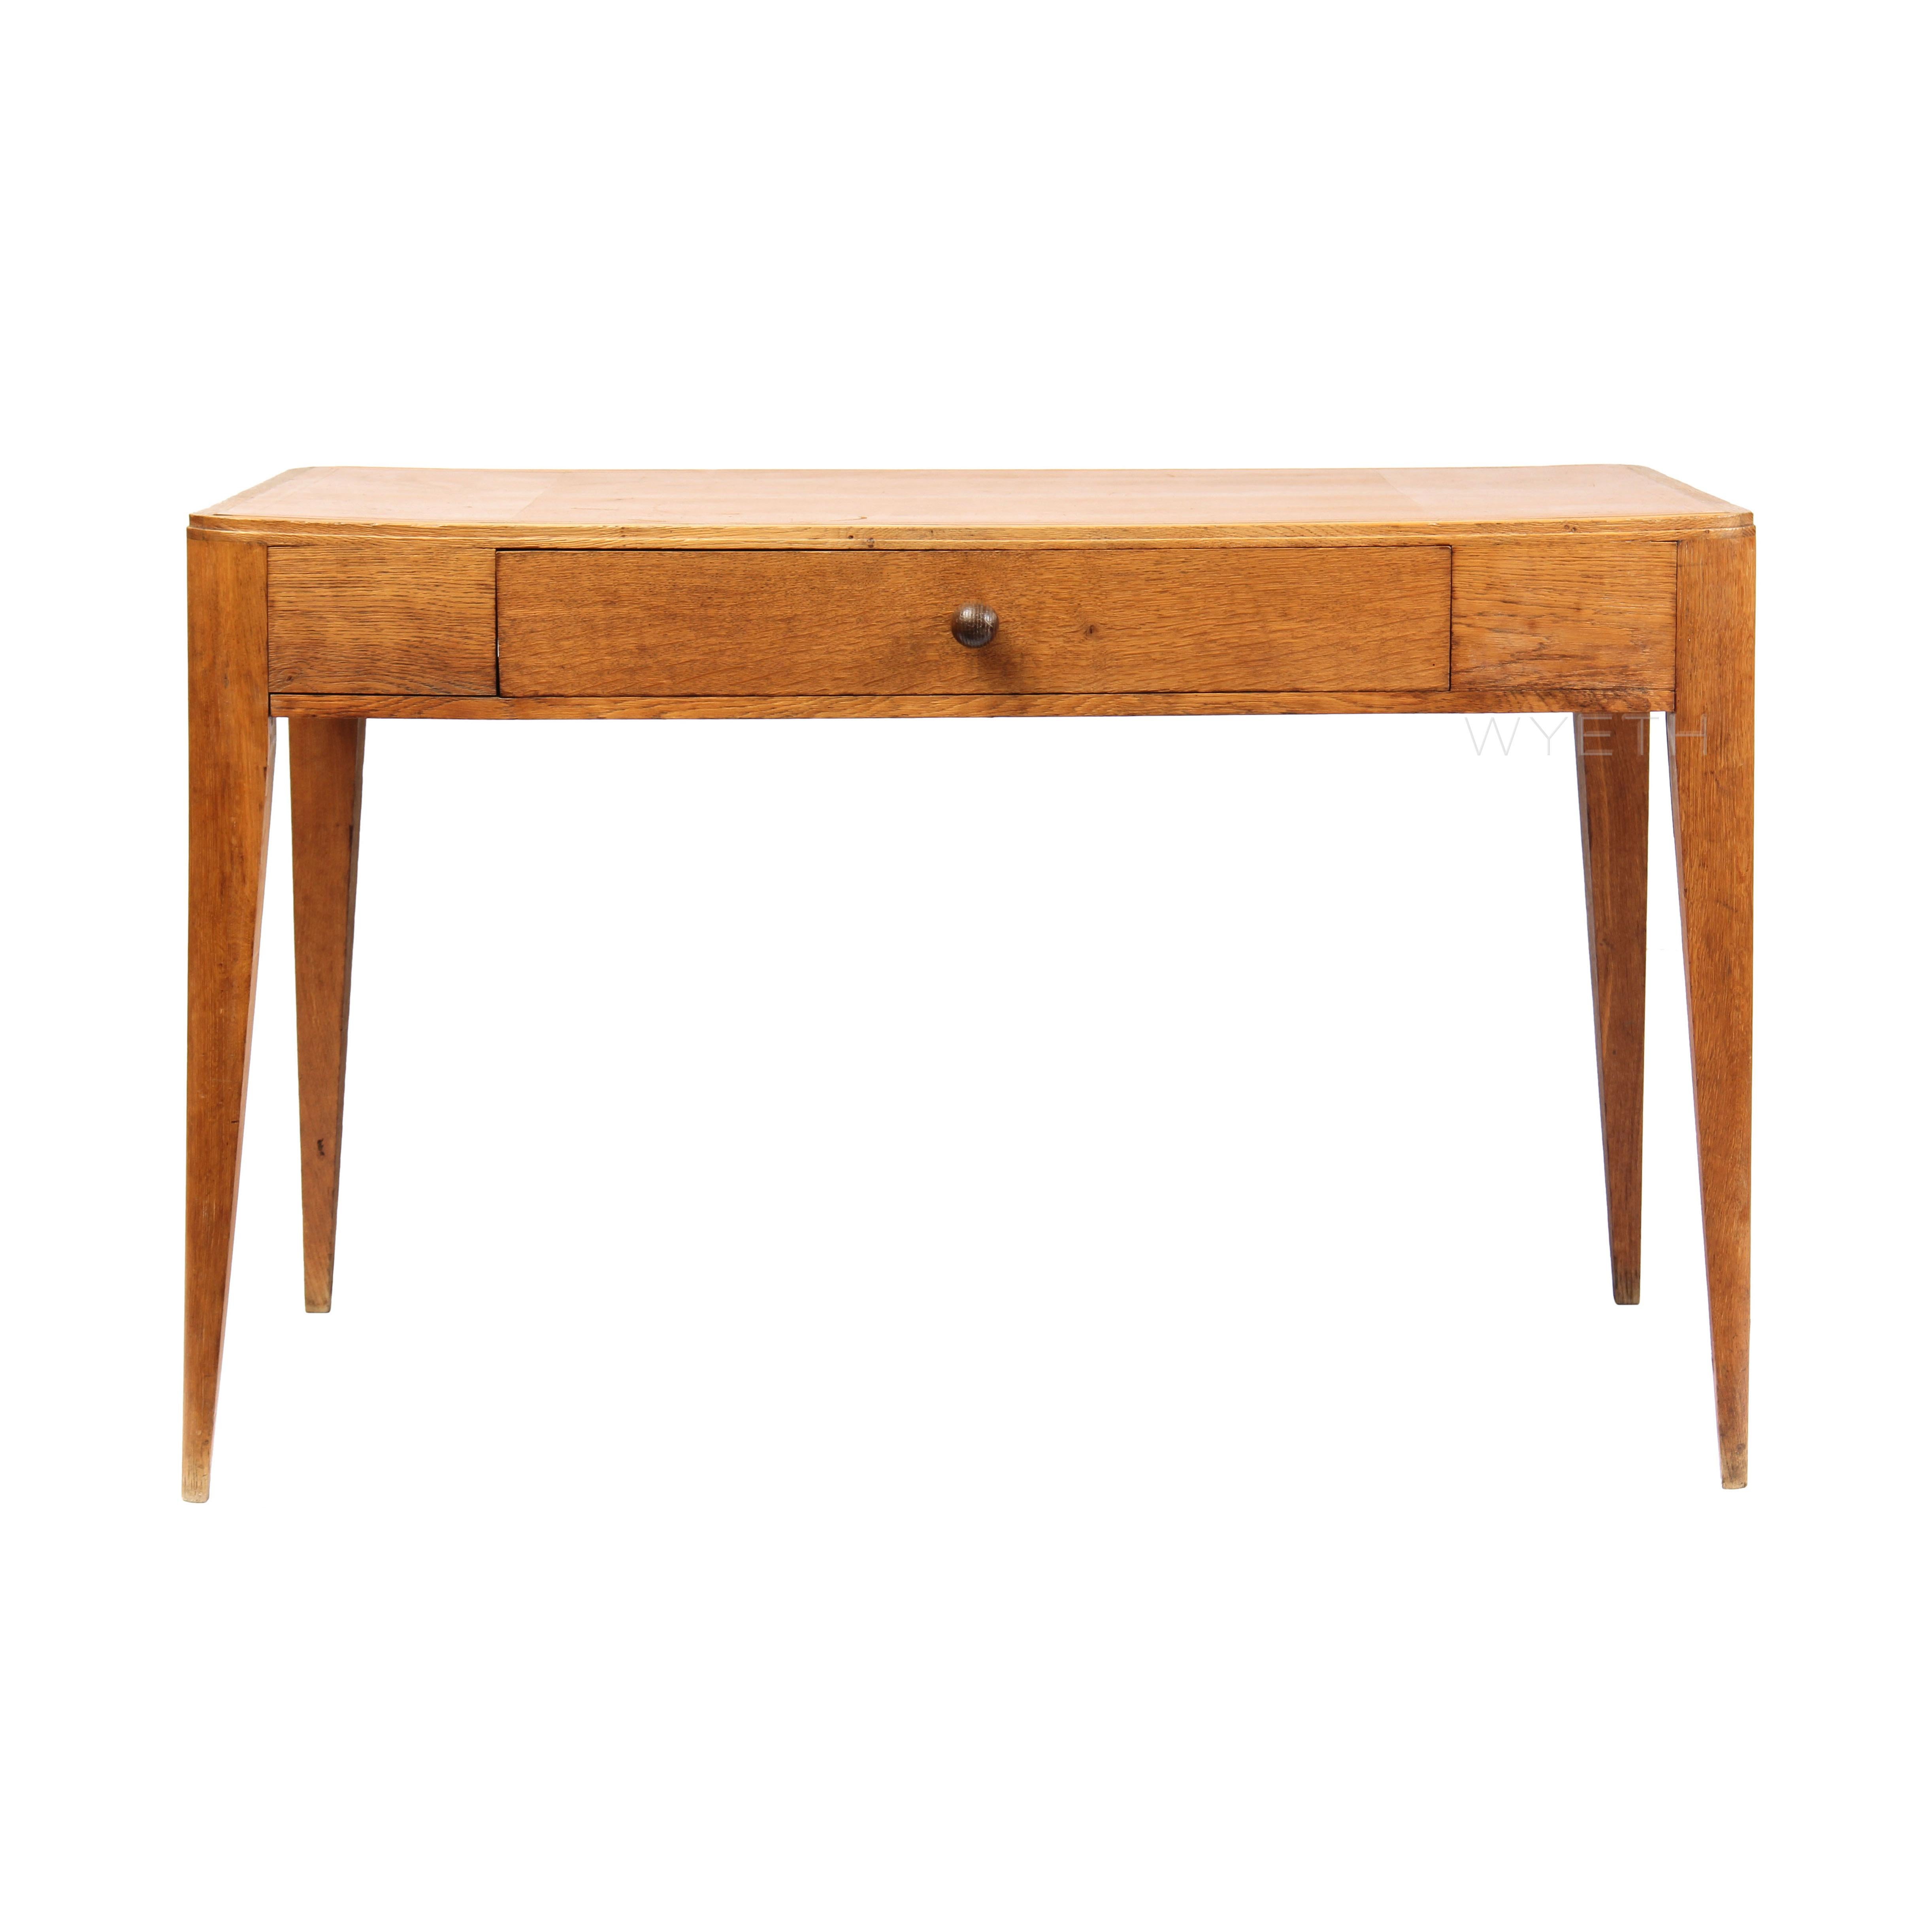 A rectangular oak desk with rounded corners, a tan leather writing surface and a central drawer, on tapered legs.

 